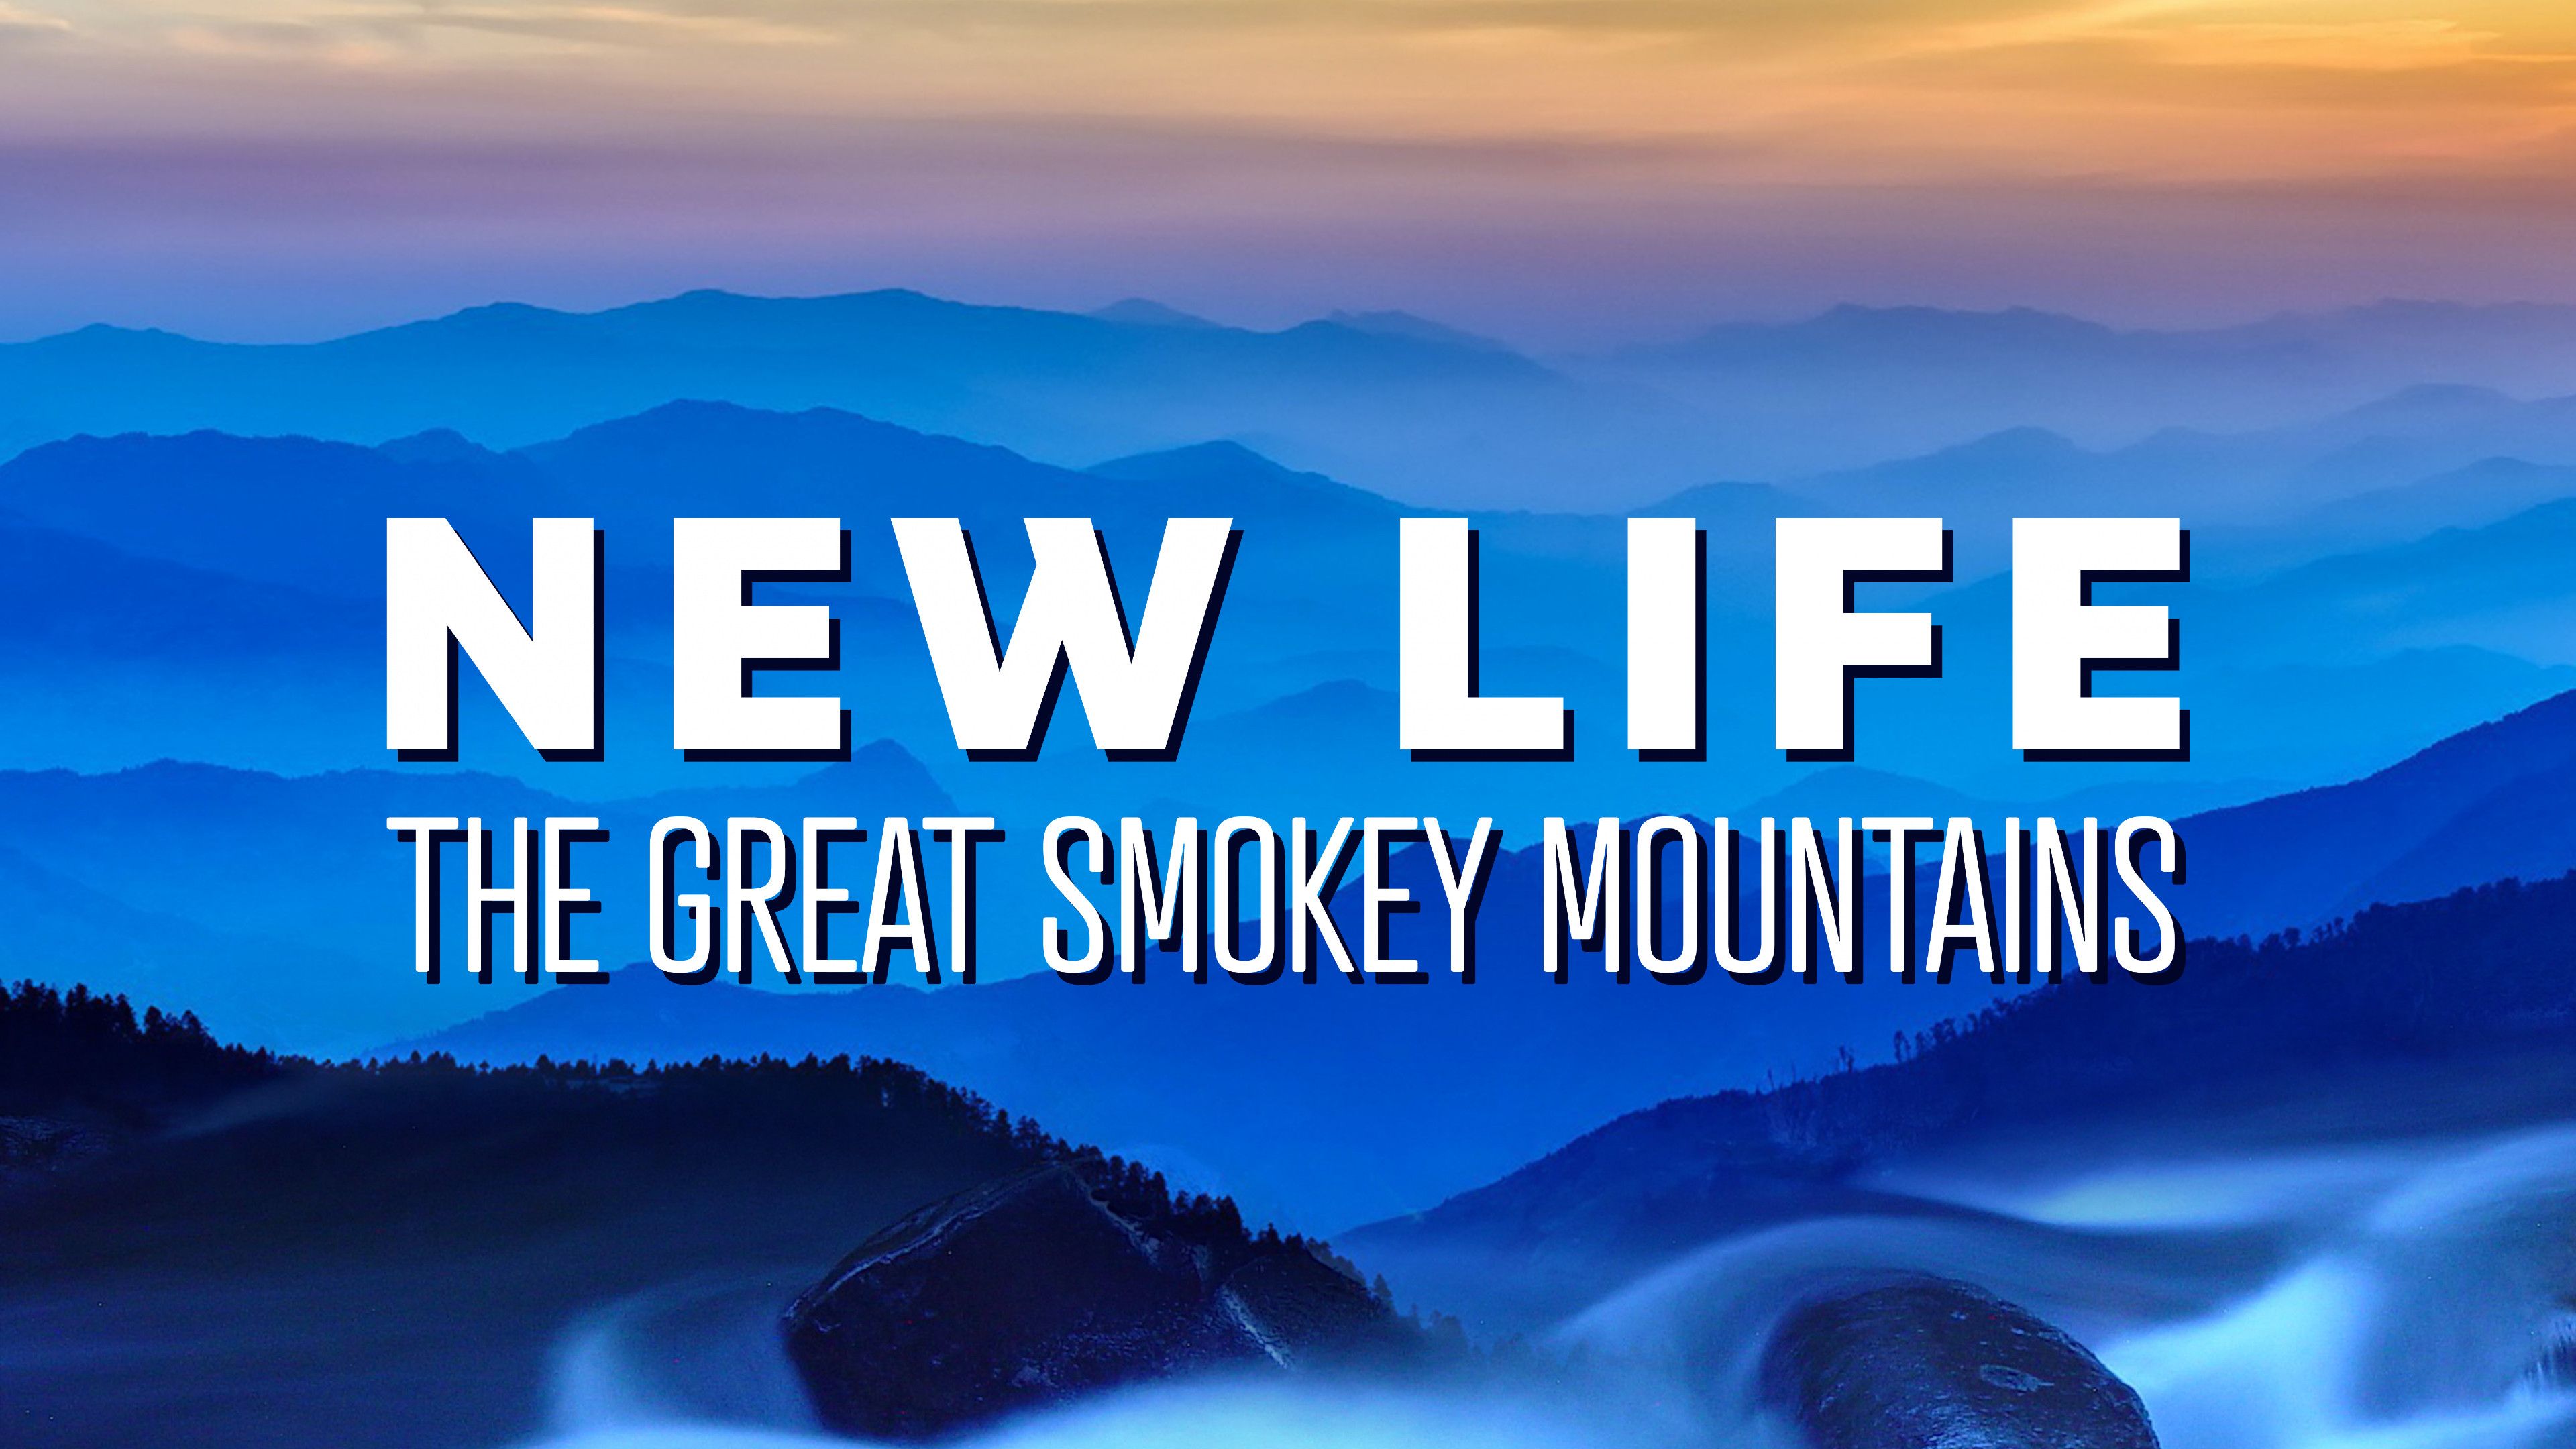 New Life: The Great Smoky Mountains